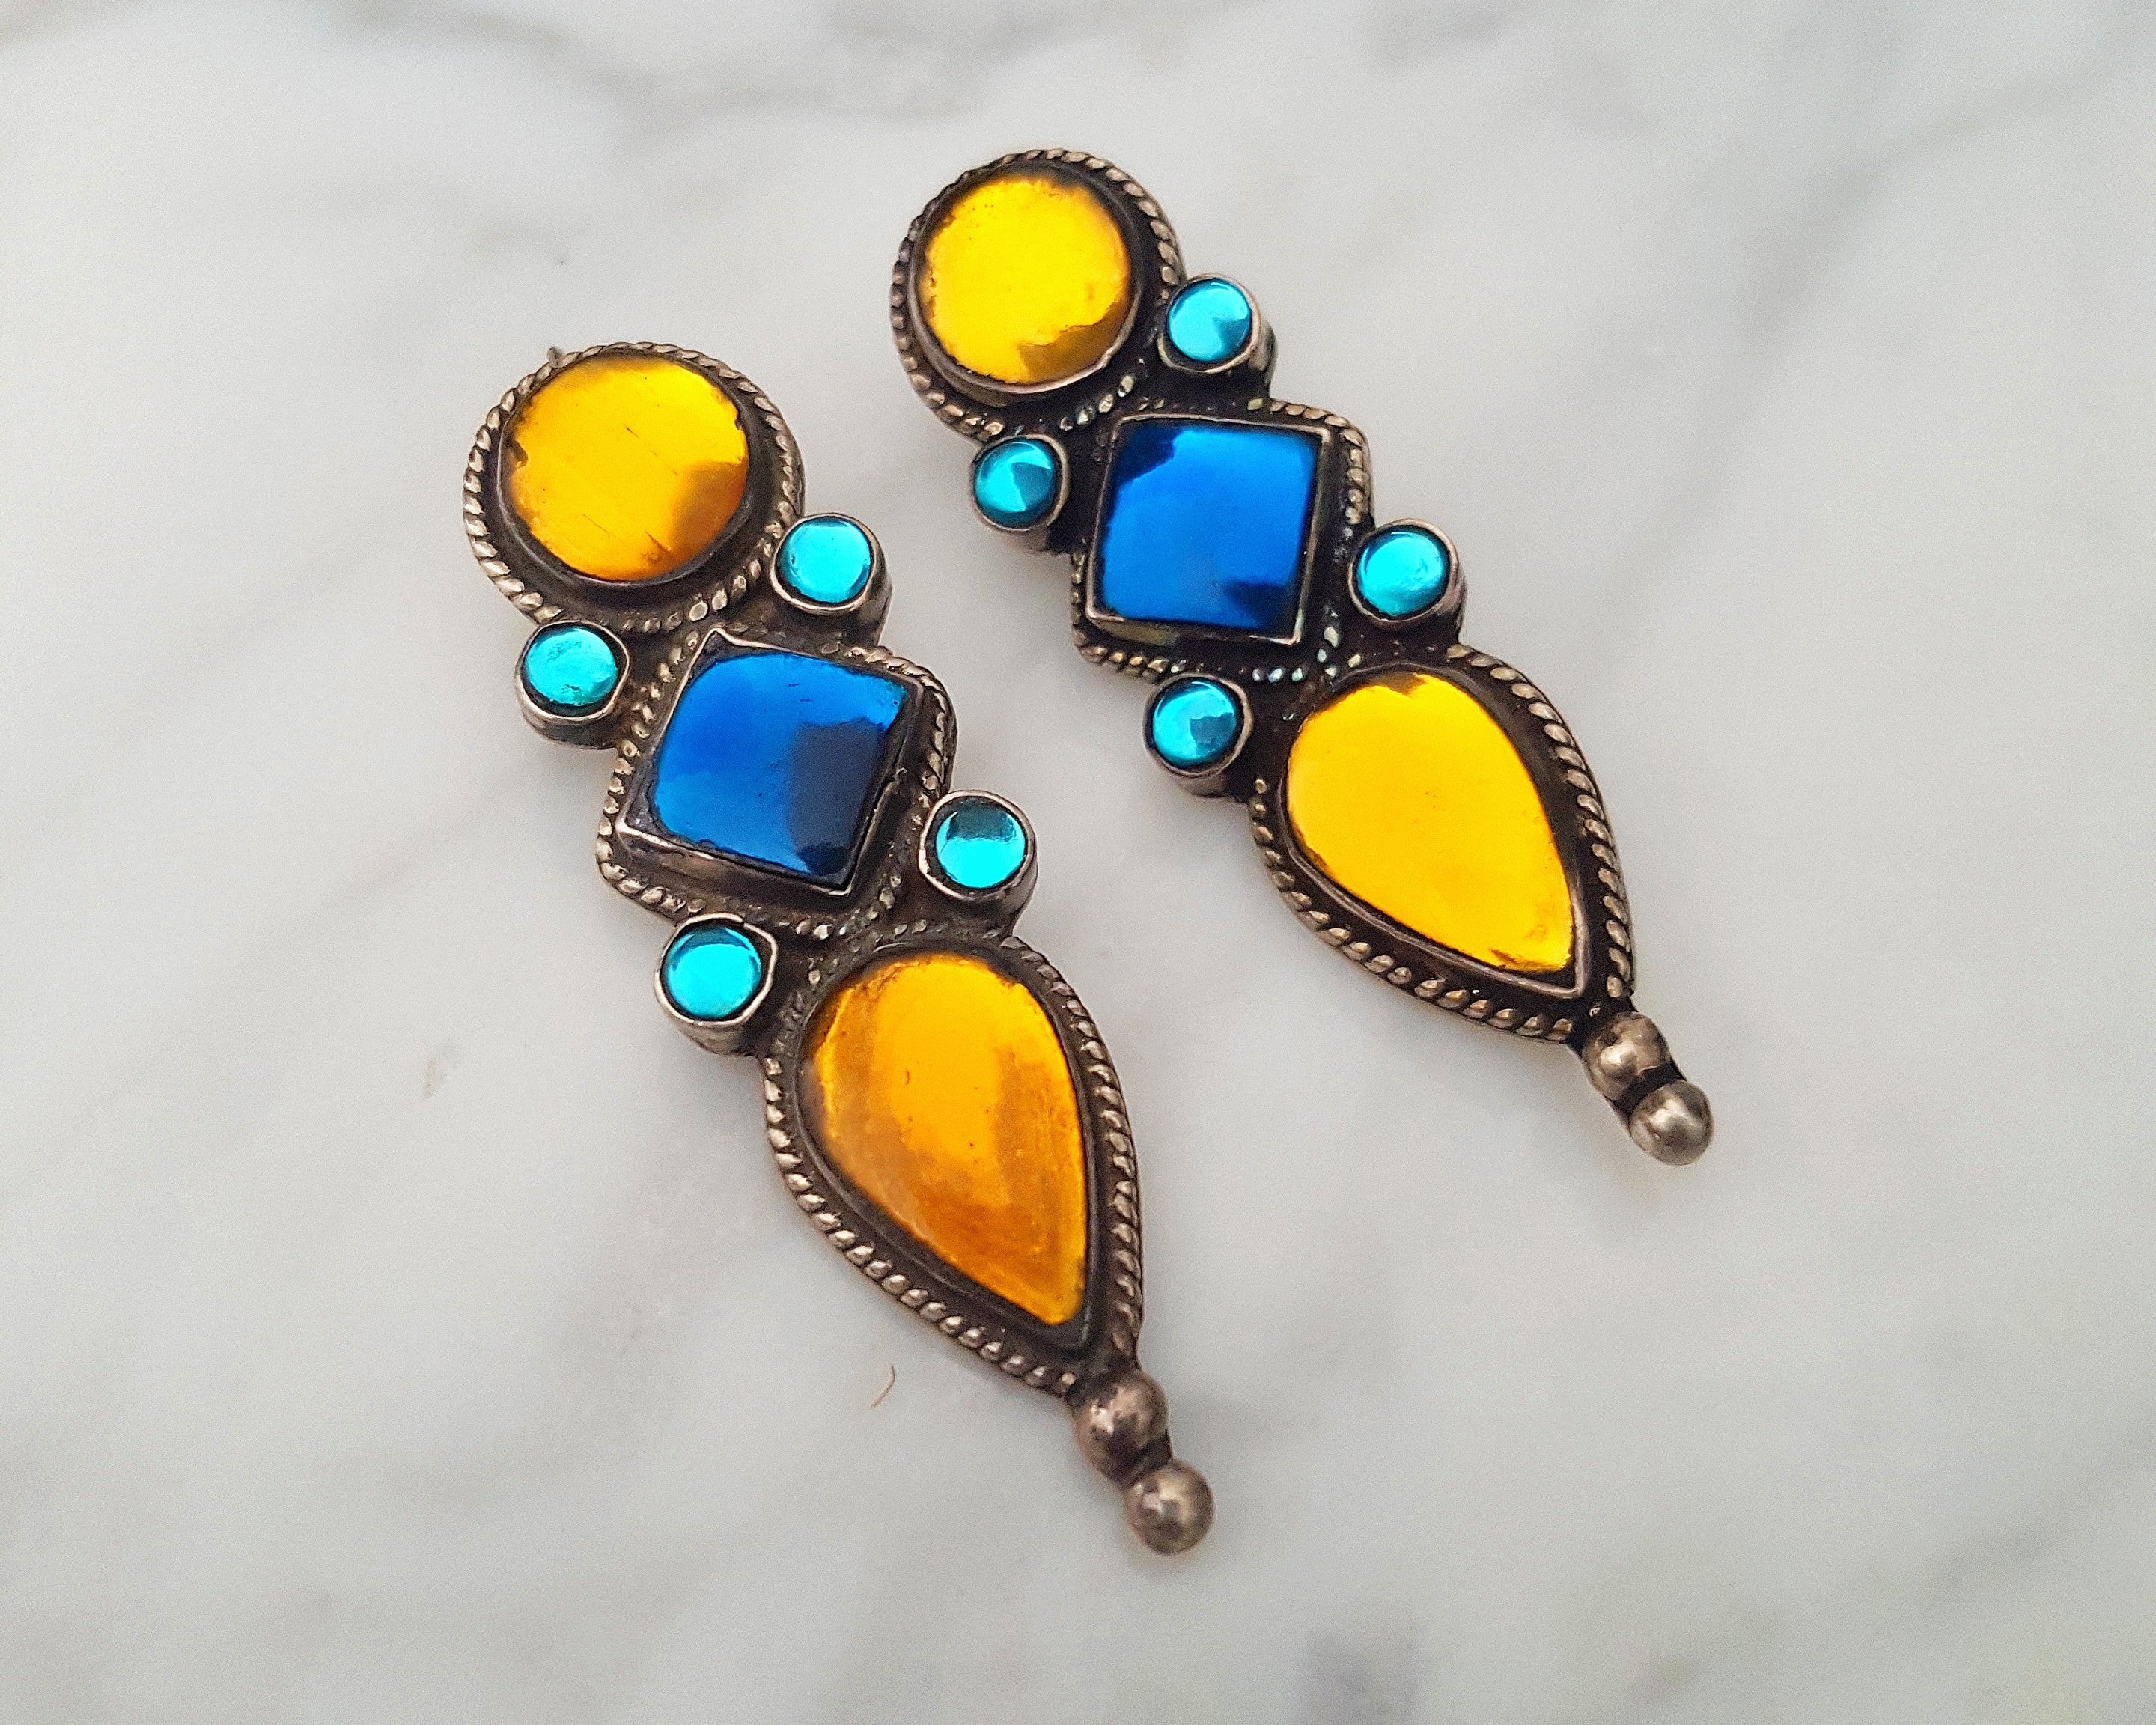 Rajasthani Earrings with Blue and Orange Glass